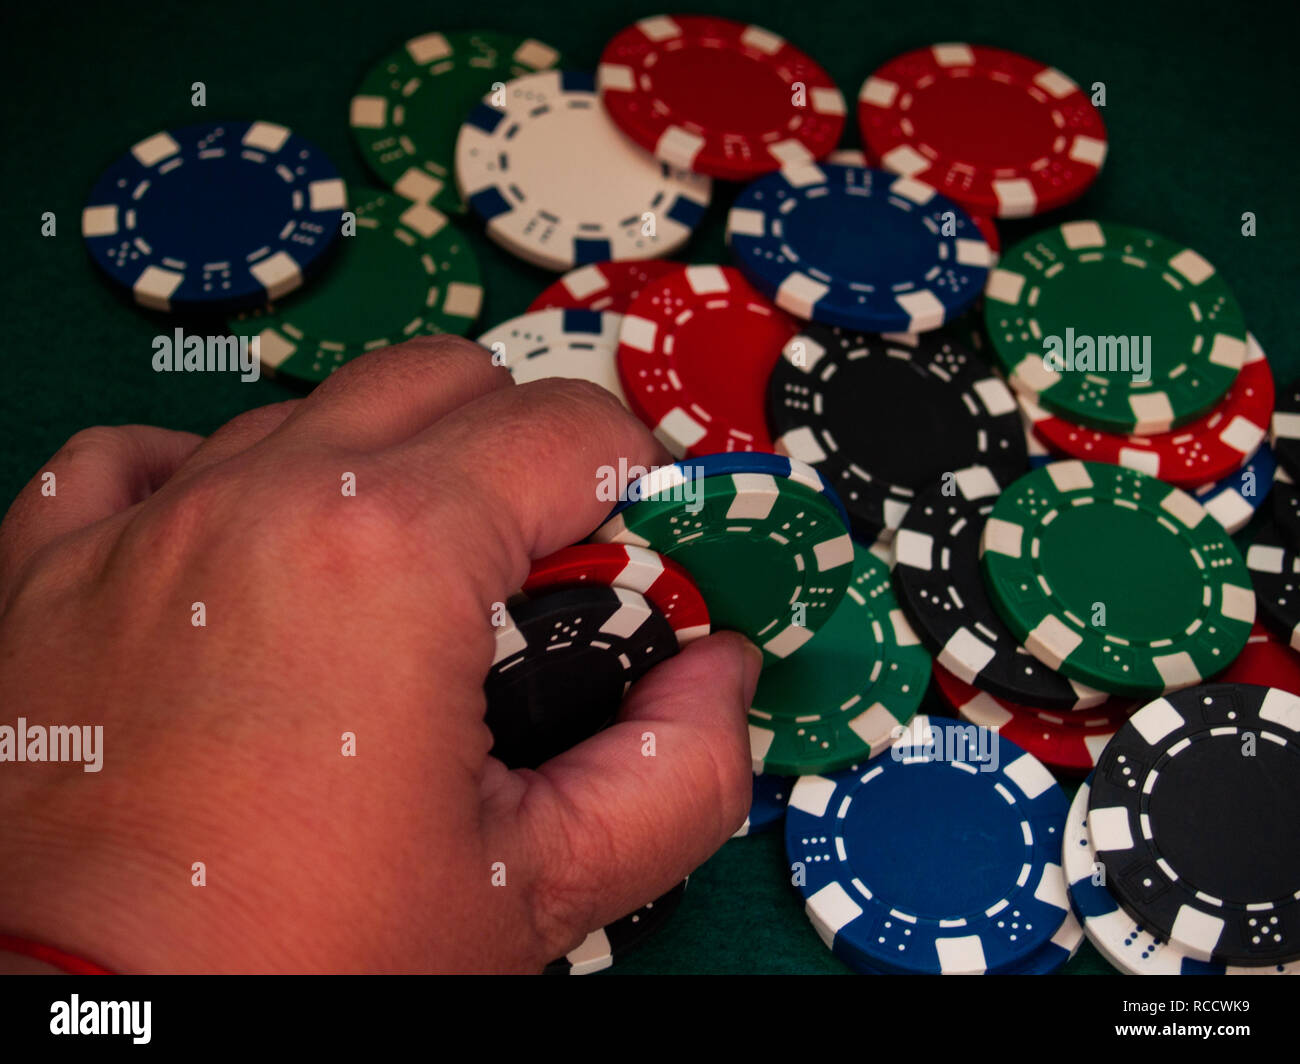 A person holding poker chips of various colors with his hand Stock Photo